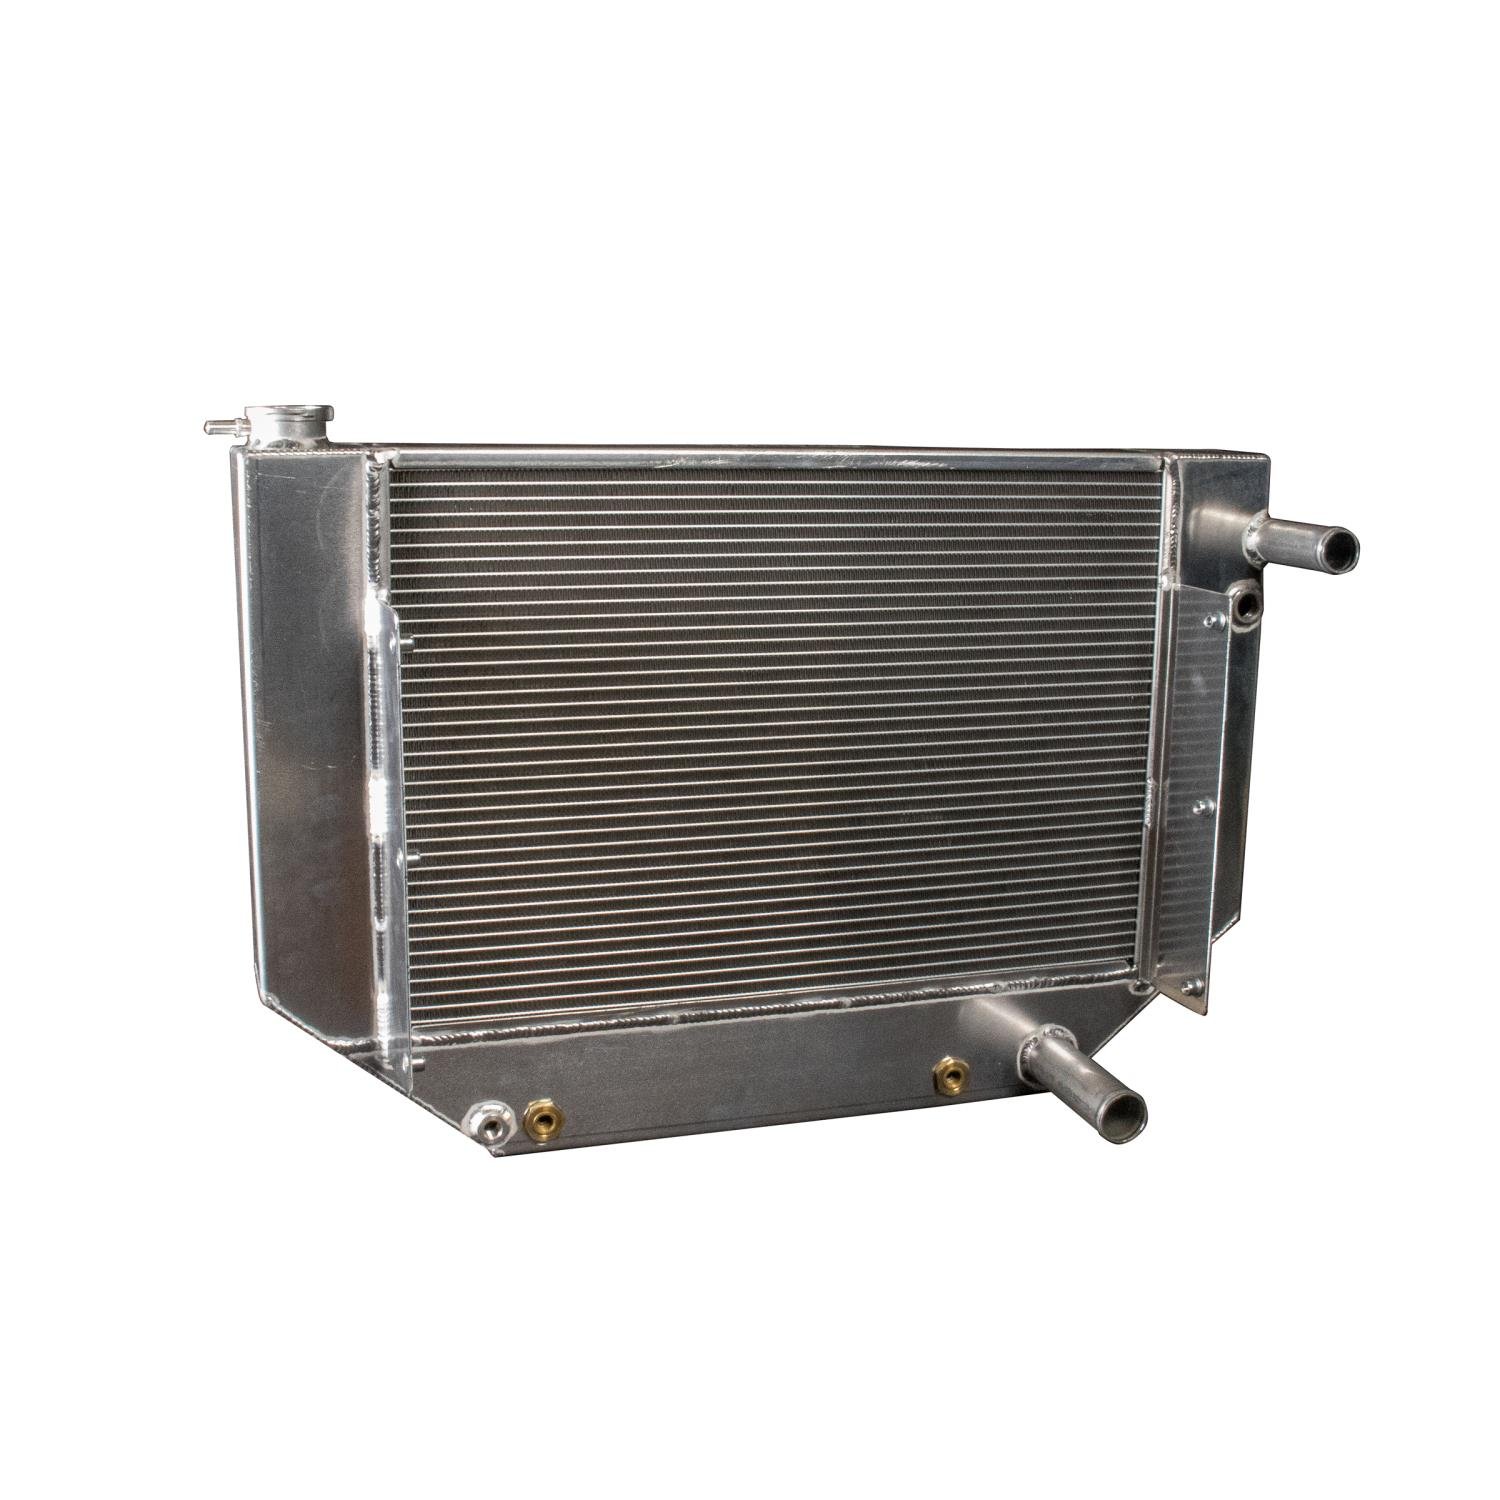 PerformanceFit Radiator 1955-1957 Tri Five Chevy LS Swap with Transmission Cooler